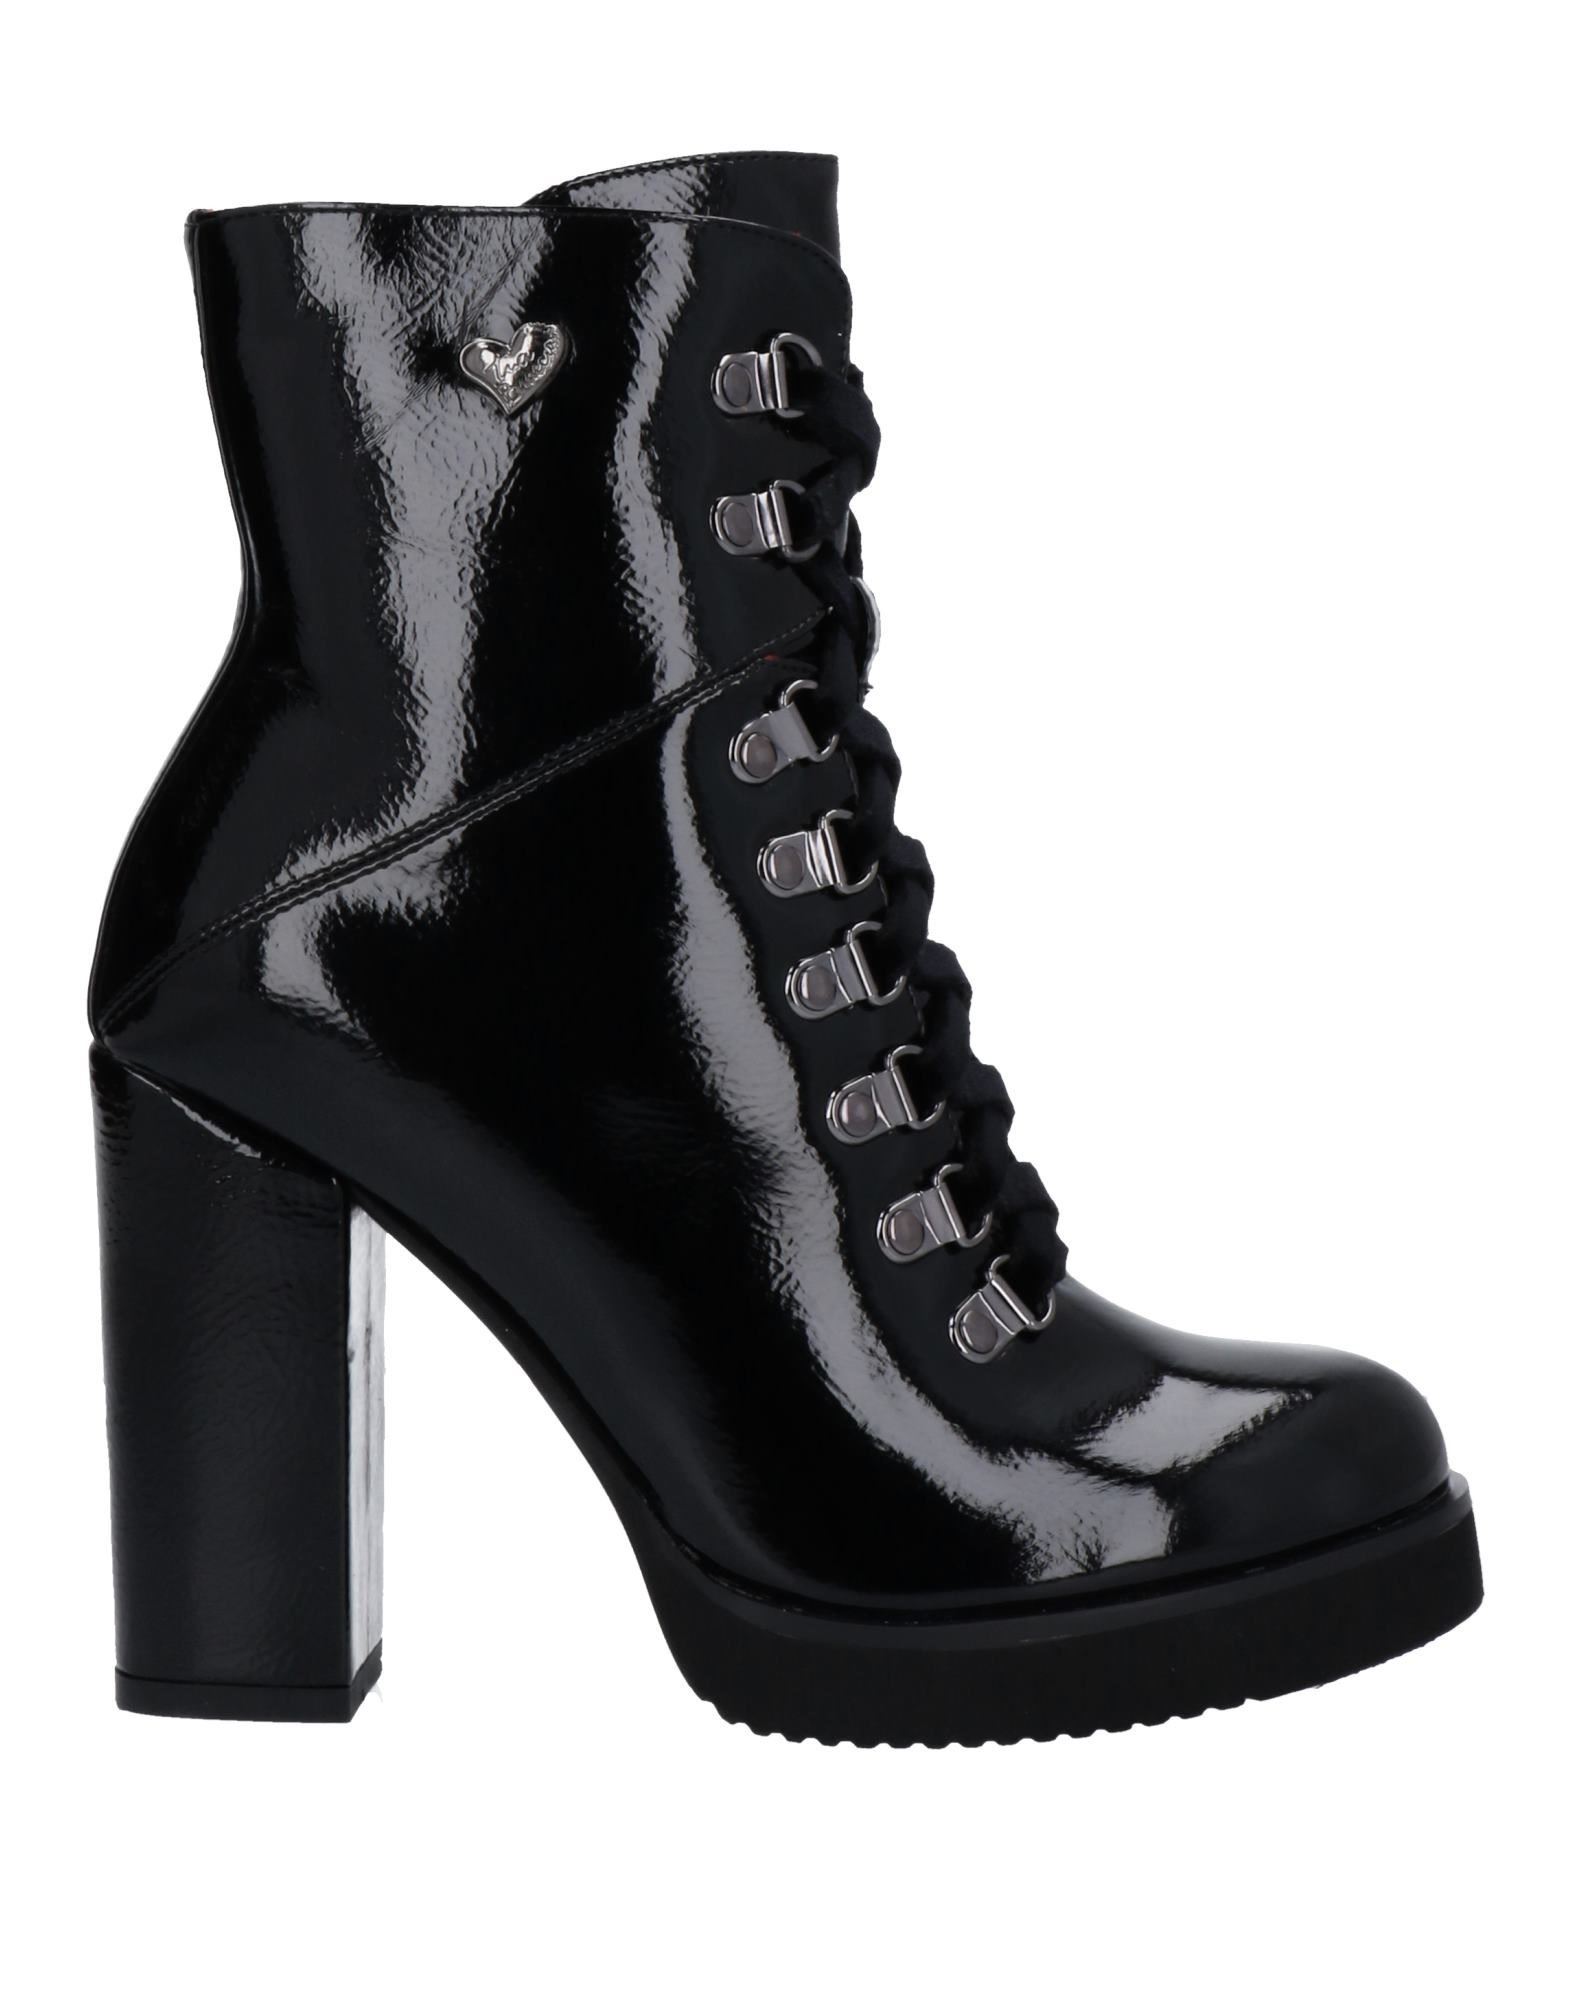 Tua By Braccialini Ankle Boots In Black